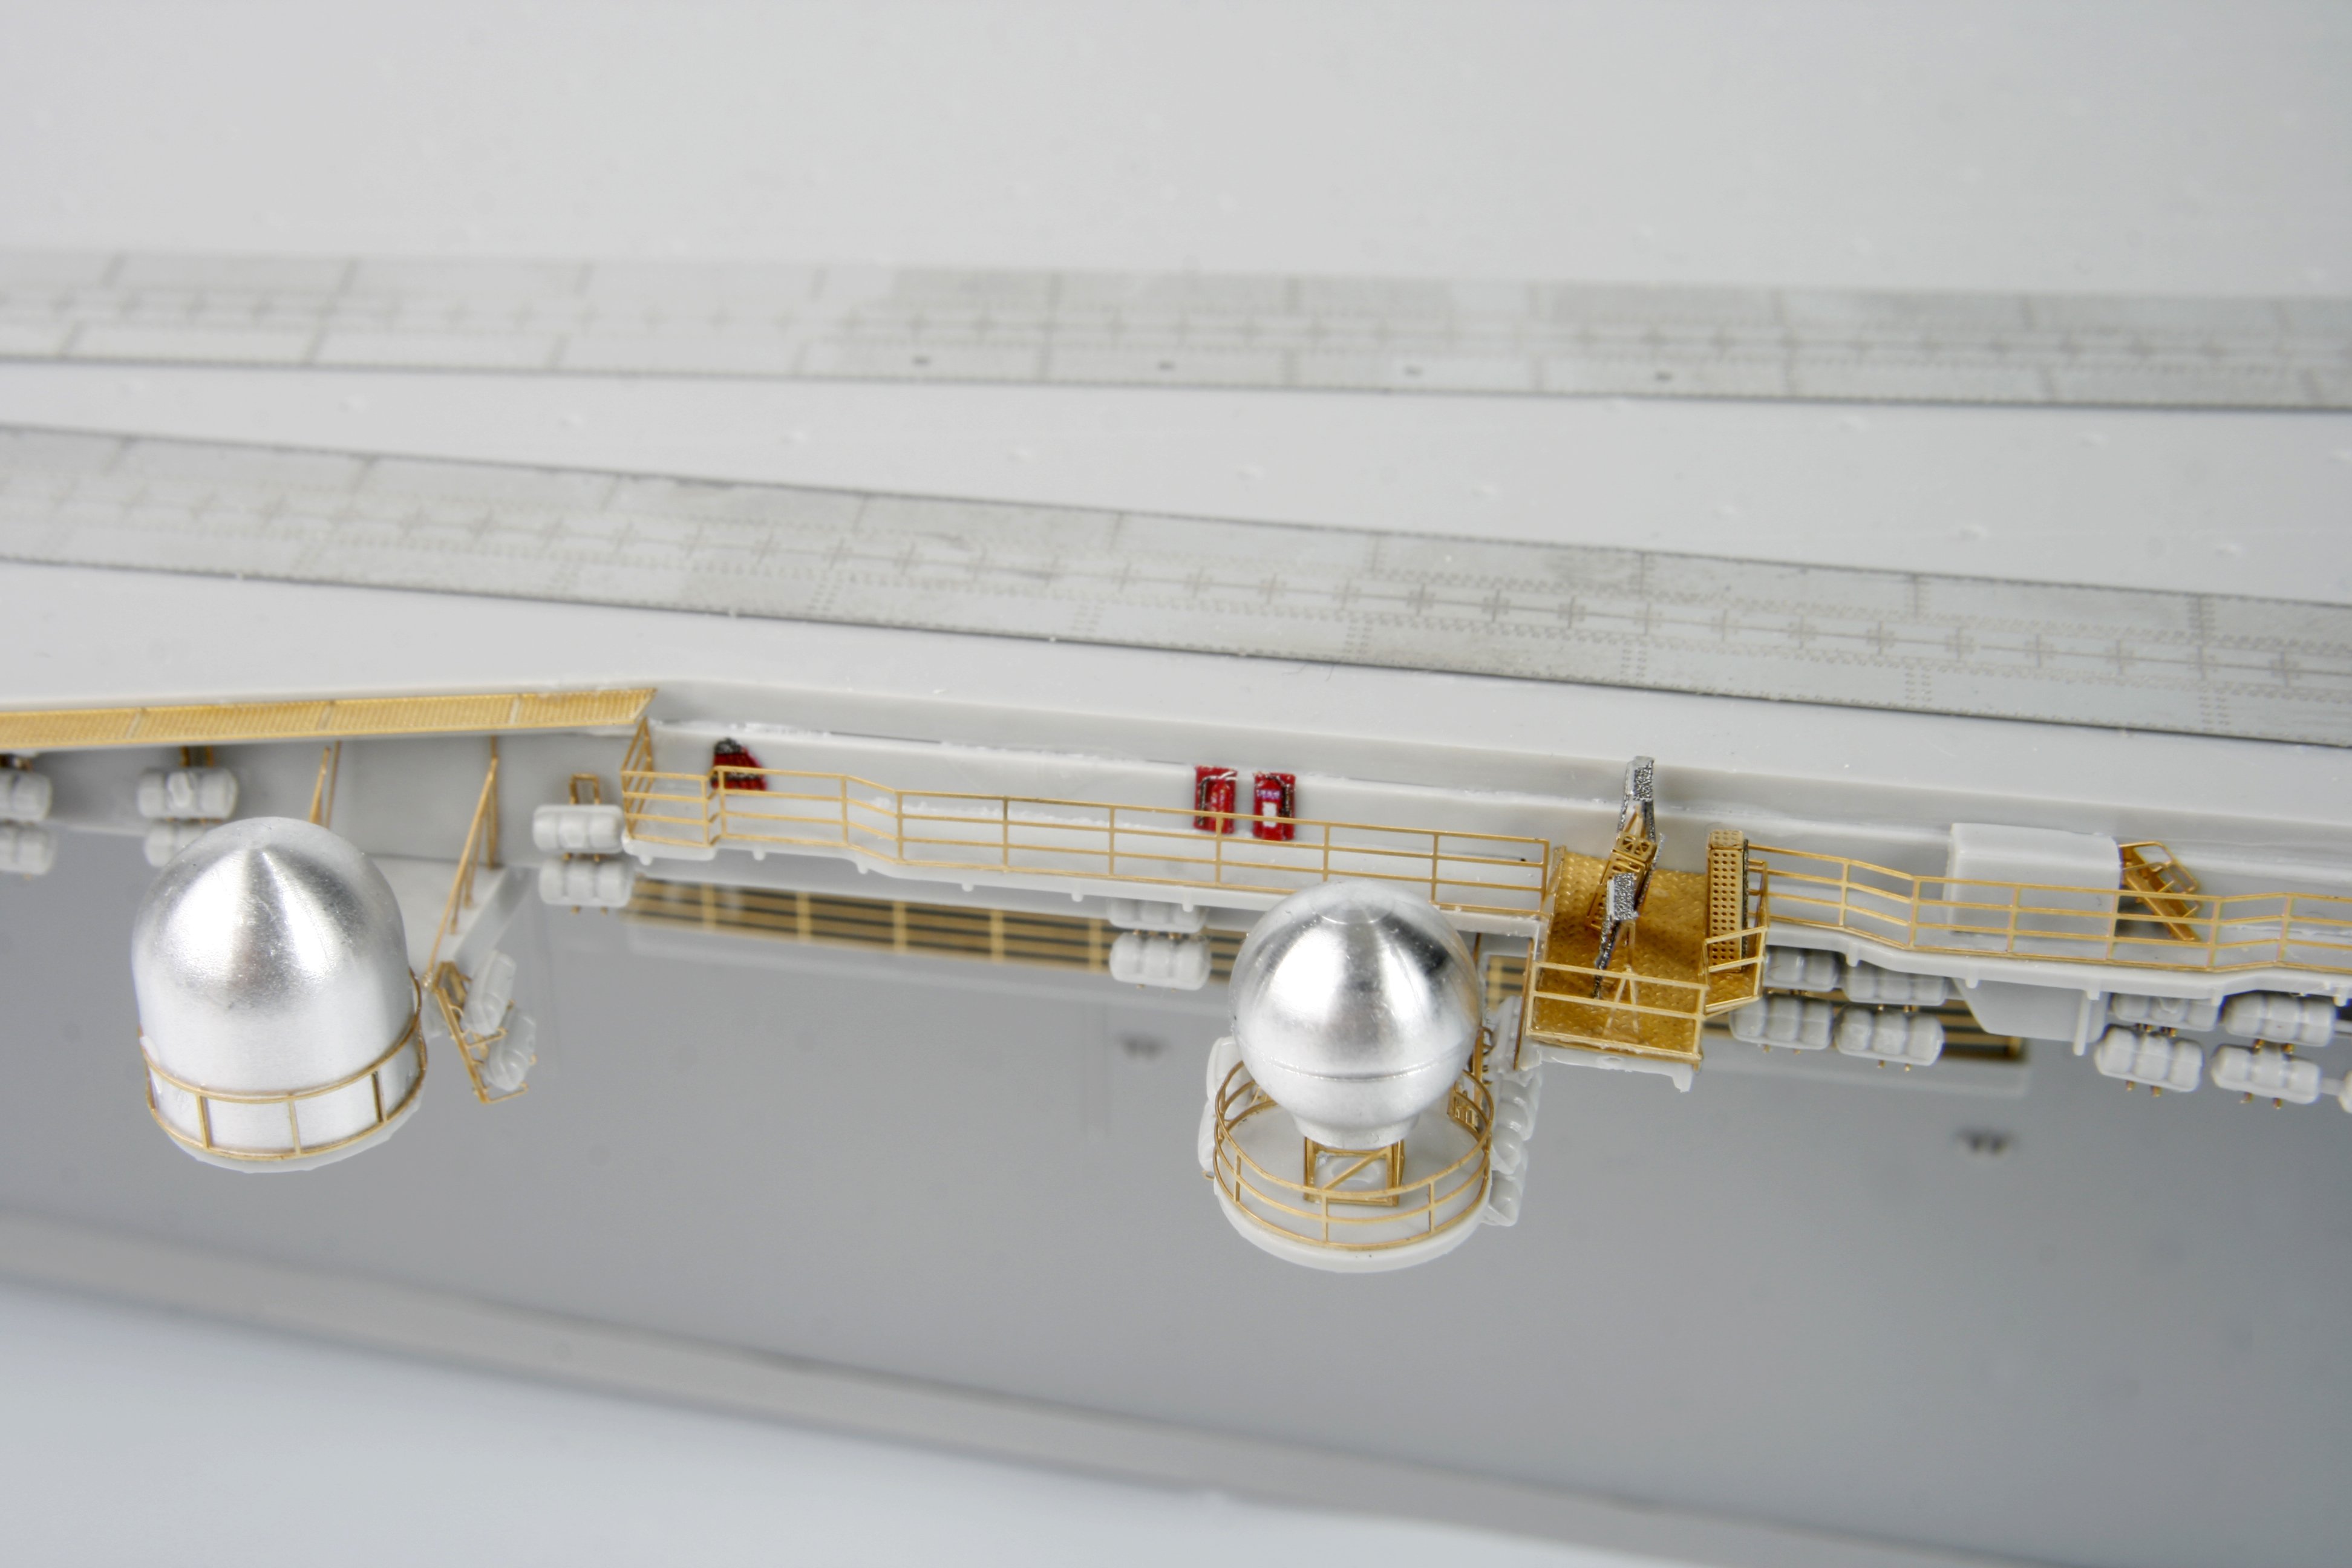 1/350 USS Constellation CV-64 Detail Up Parts for Trumpeter - Click Image to Close